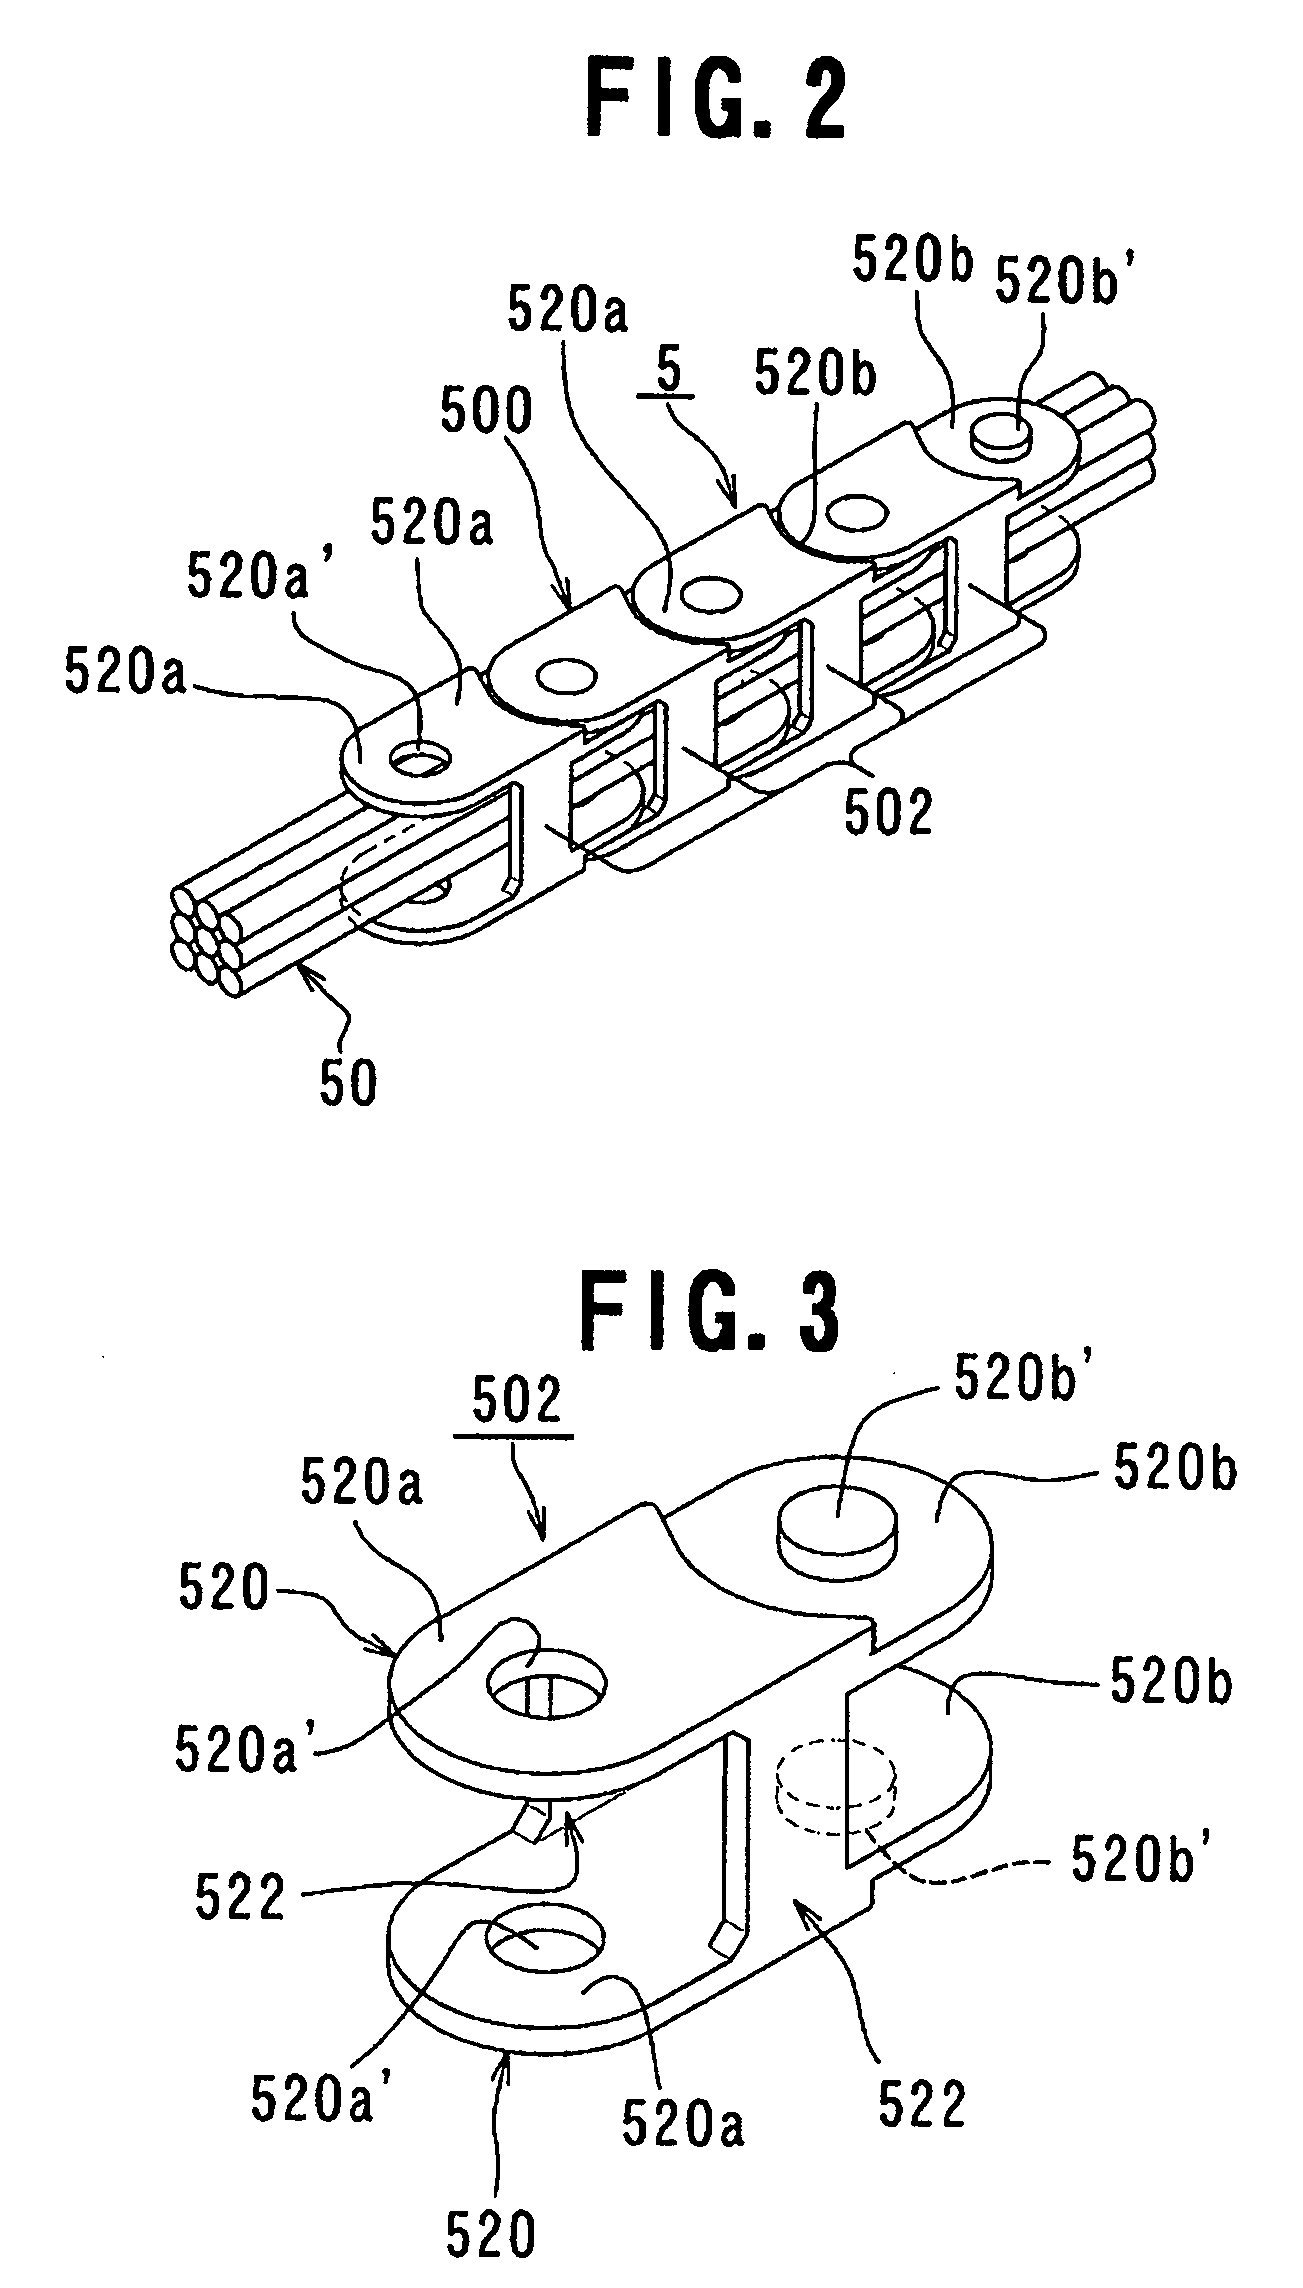 Slidable vehicle seat provided with automotive electronic parts